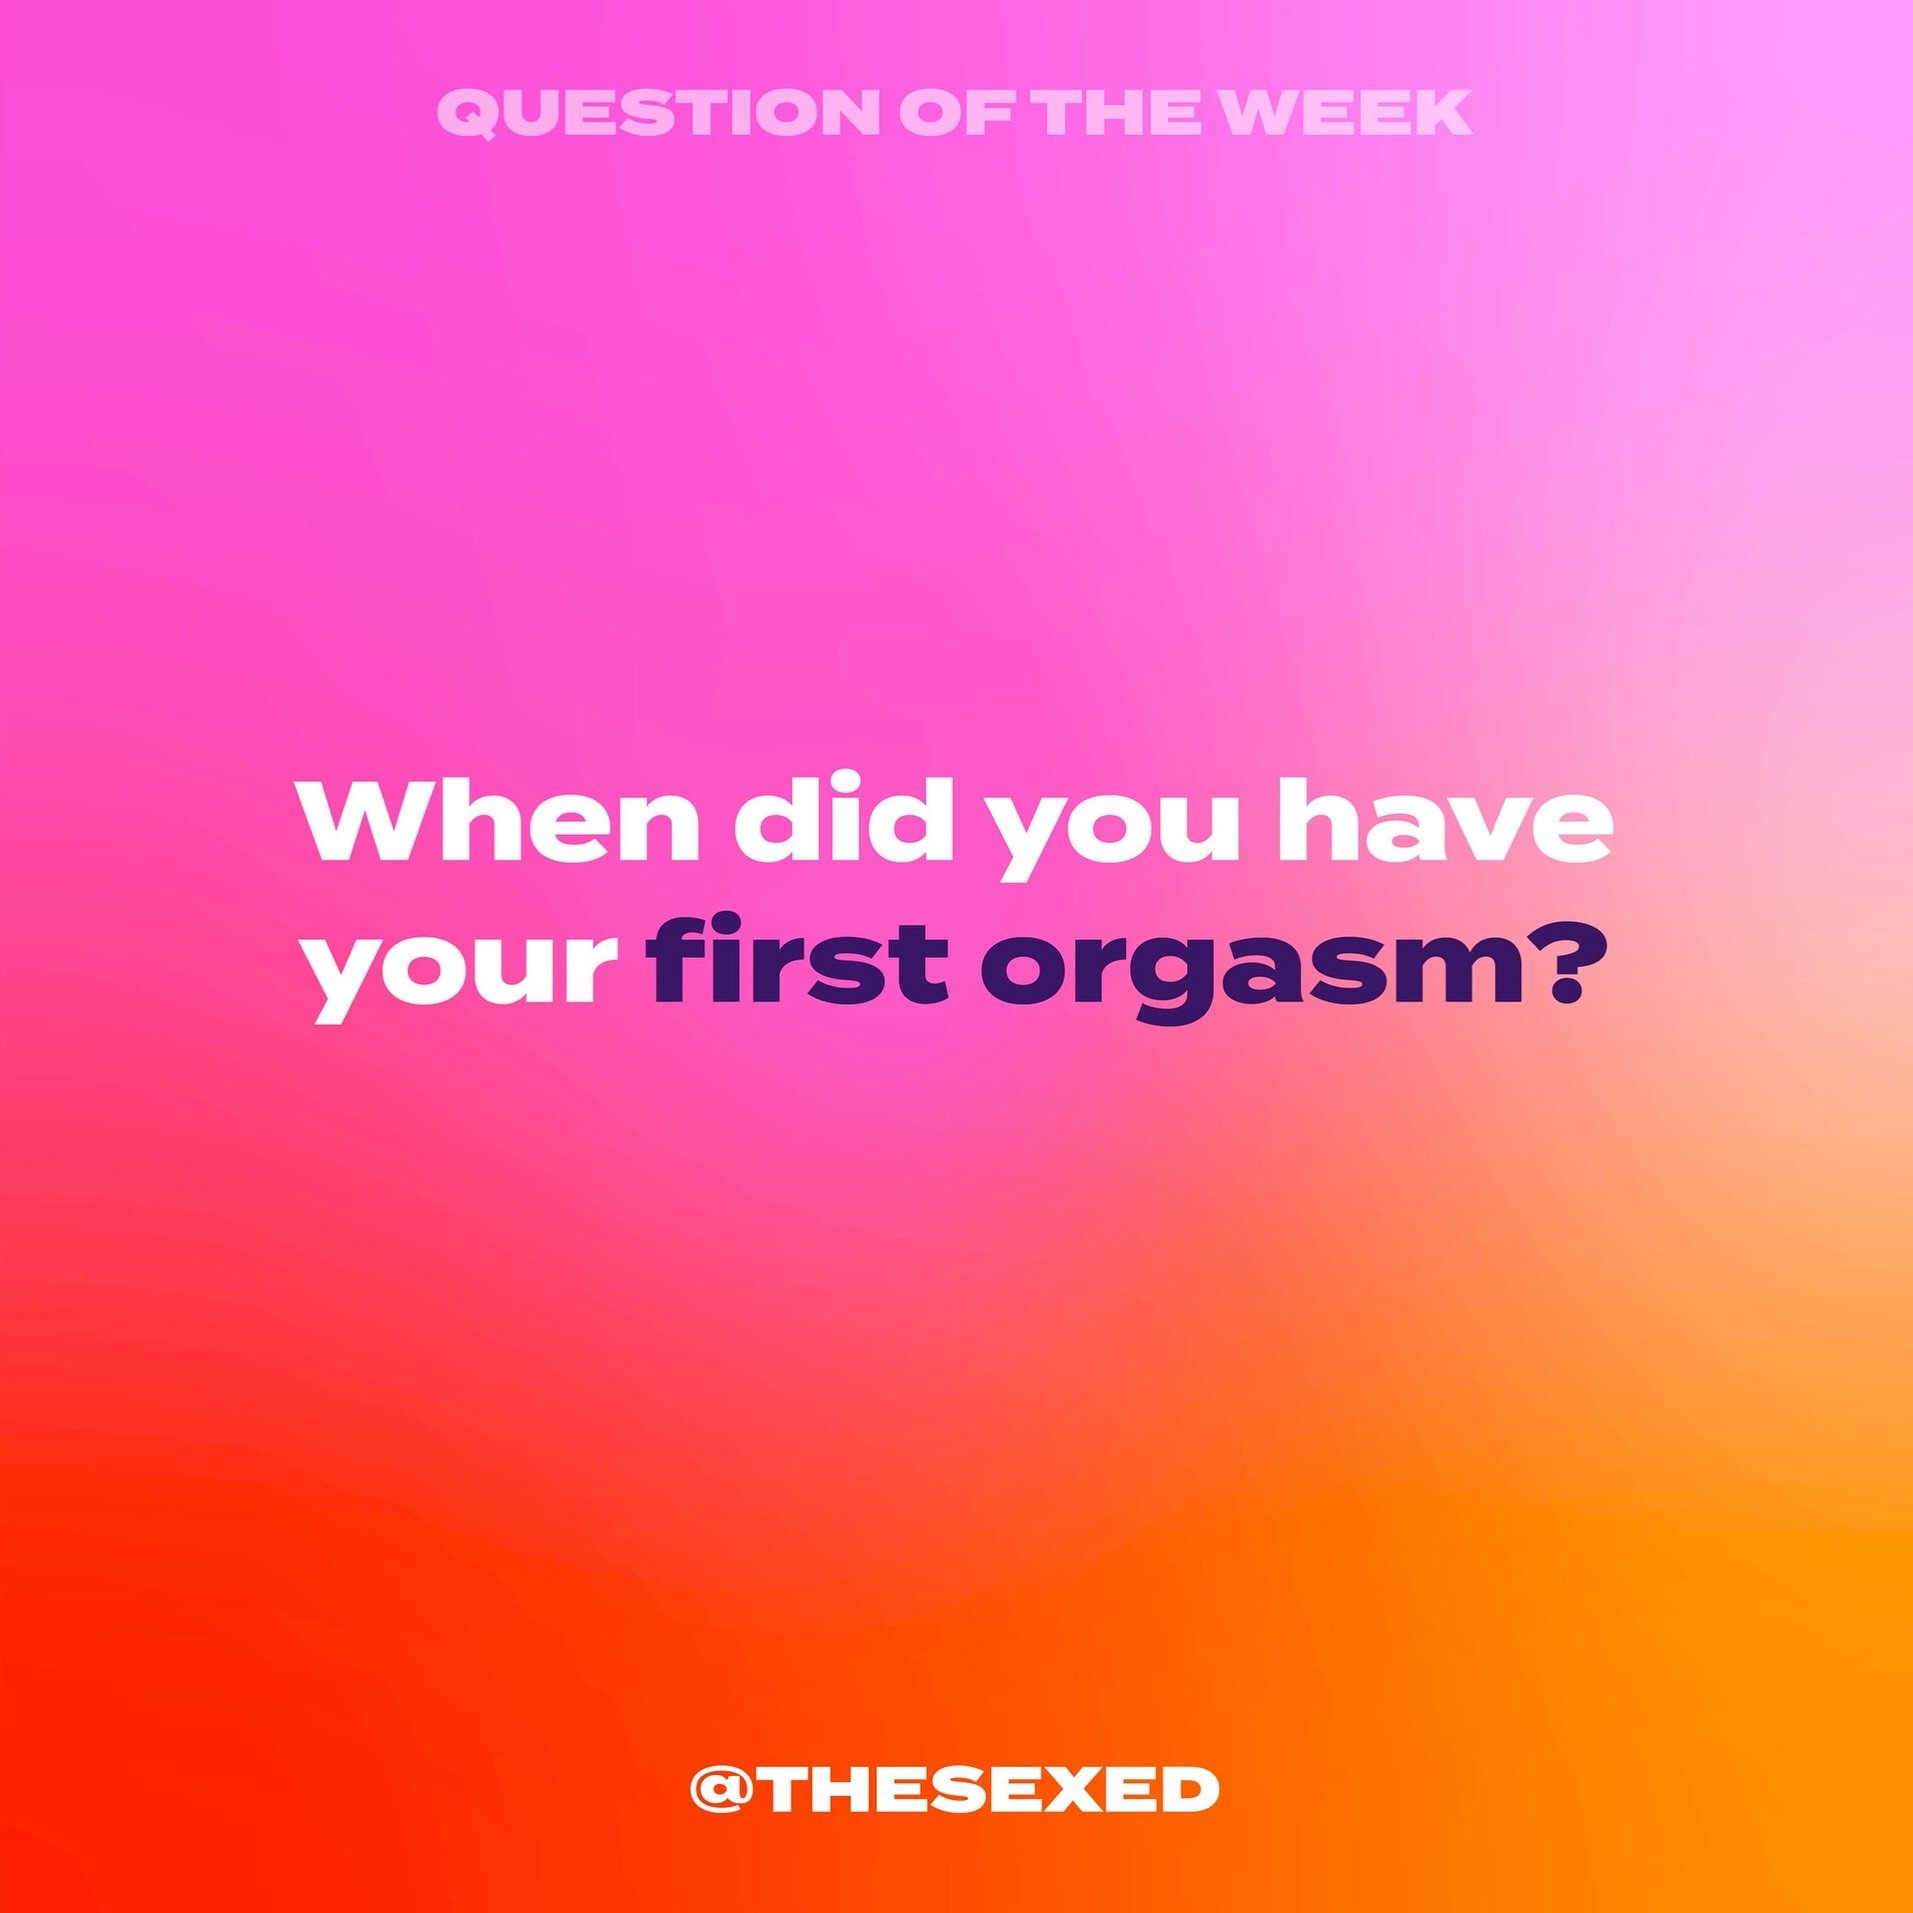 Comment below! 
⠀⠀⠀⠀⠀⠀⠀⠀⠀
⠀⠀⠀⠀⠀⠀⠀⠀⠀
PSA: At The Sex Ed, we intend to create a safe environment for our community to feel heard, use their voices, and share experiences. We do not condone sending illicit images and/or harassment of any form to any of 